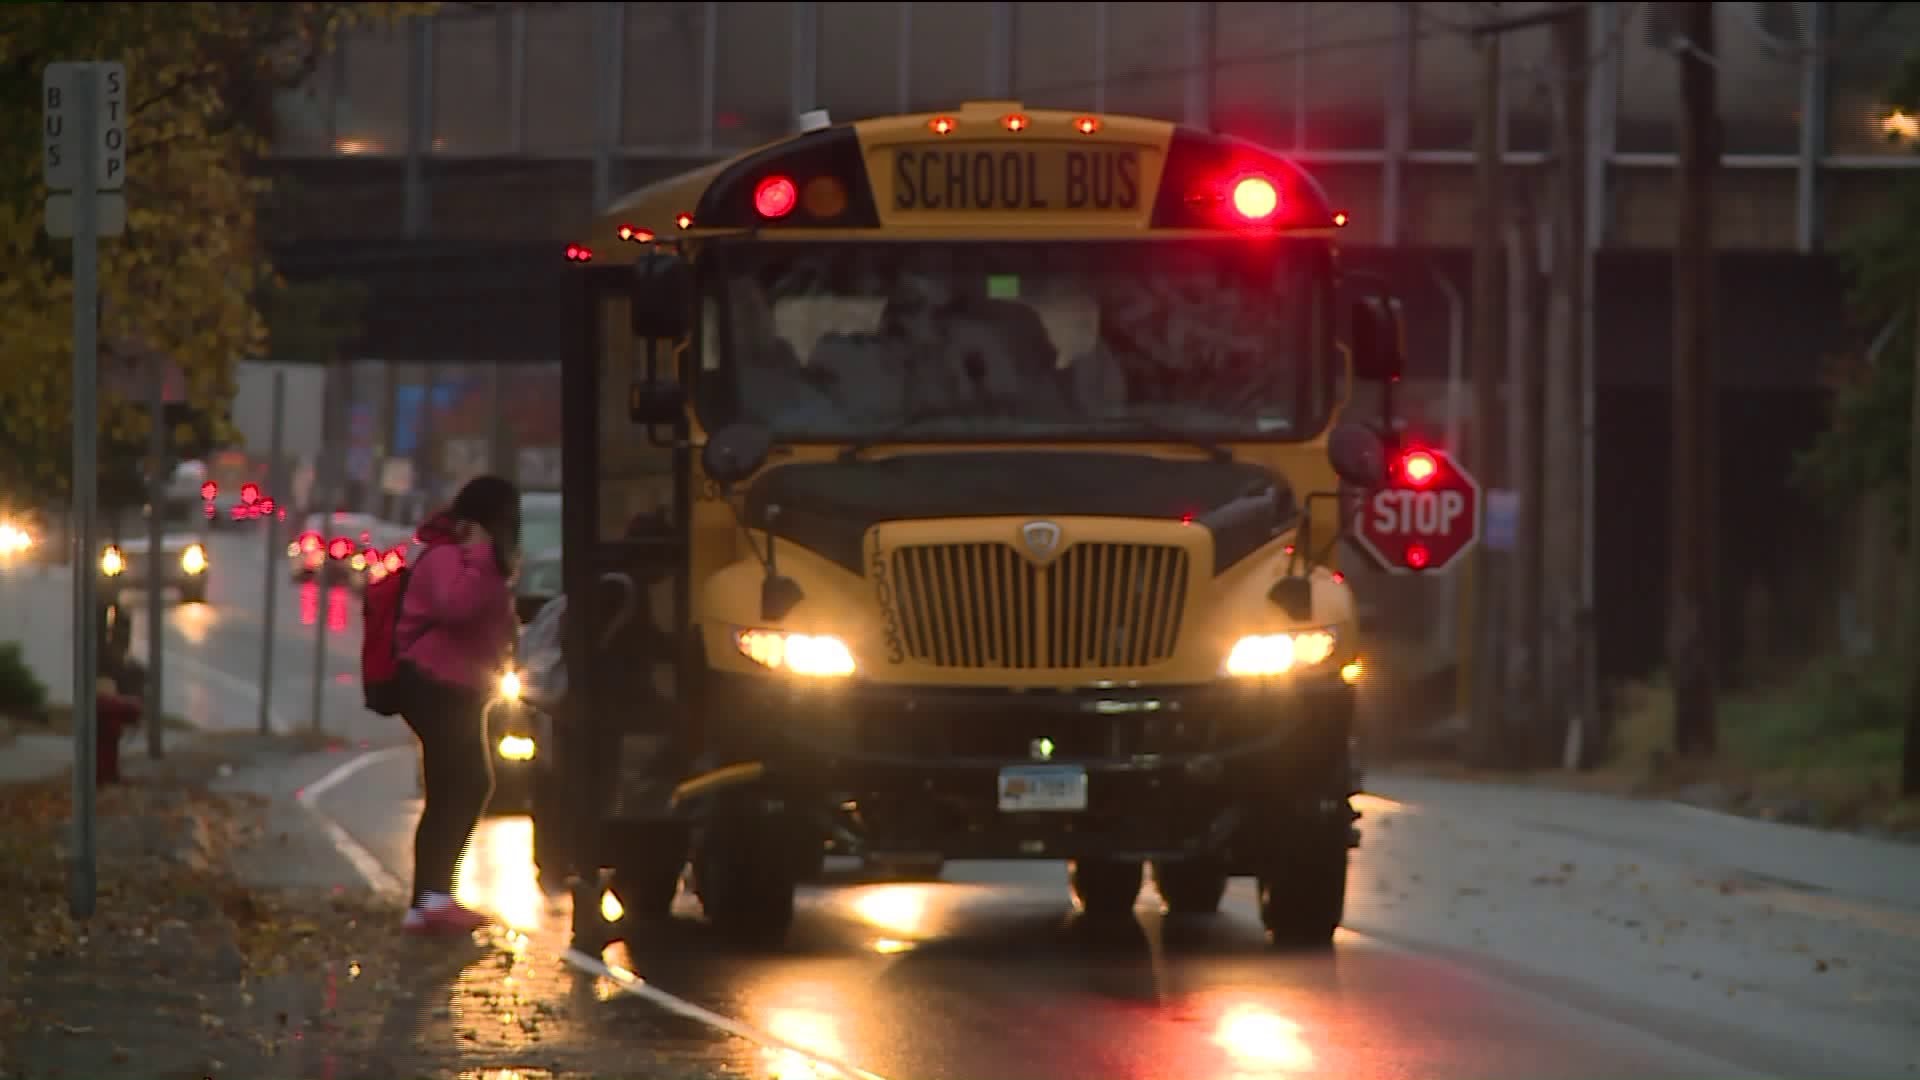 Video showing truck passing school bus with flashing lights in East Hartford investigated